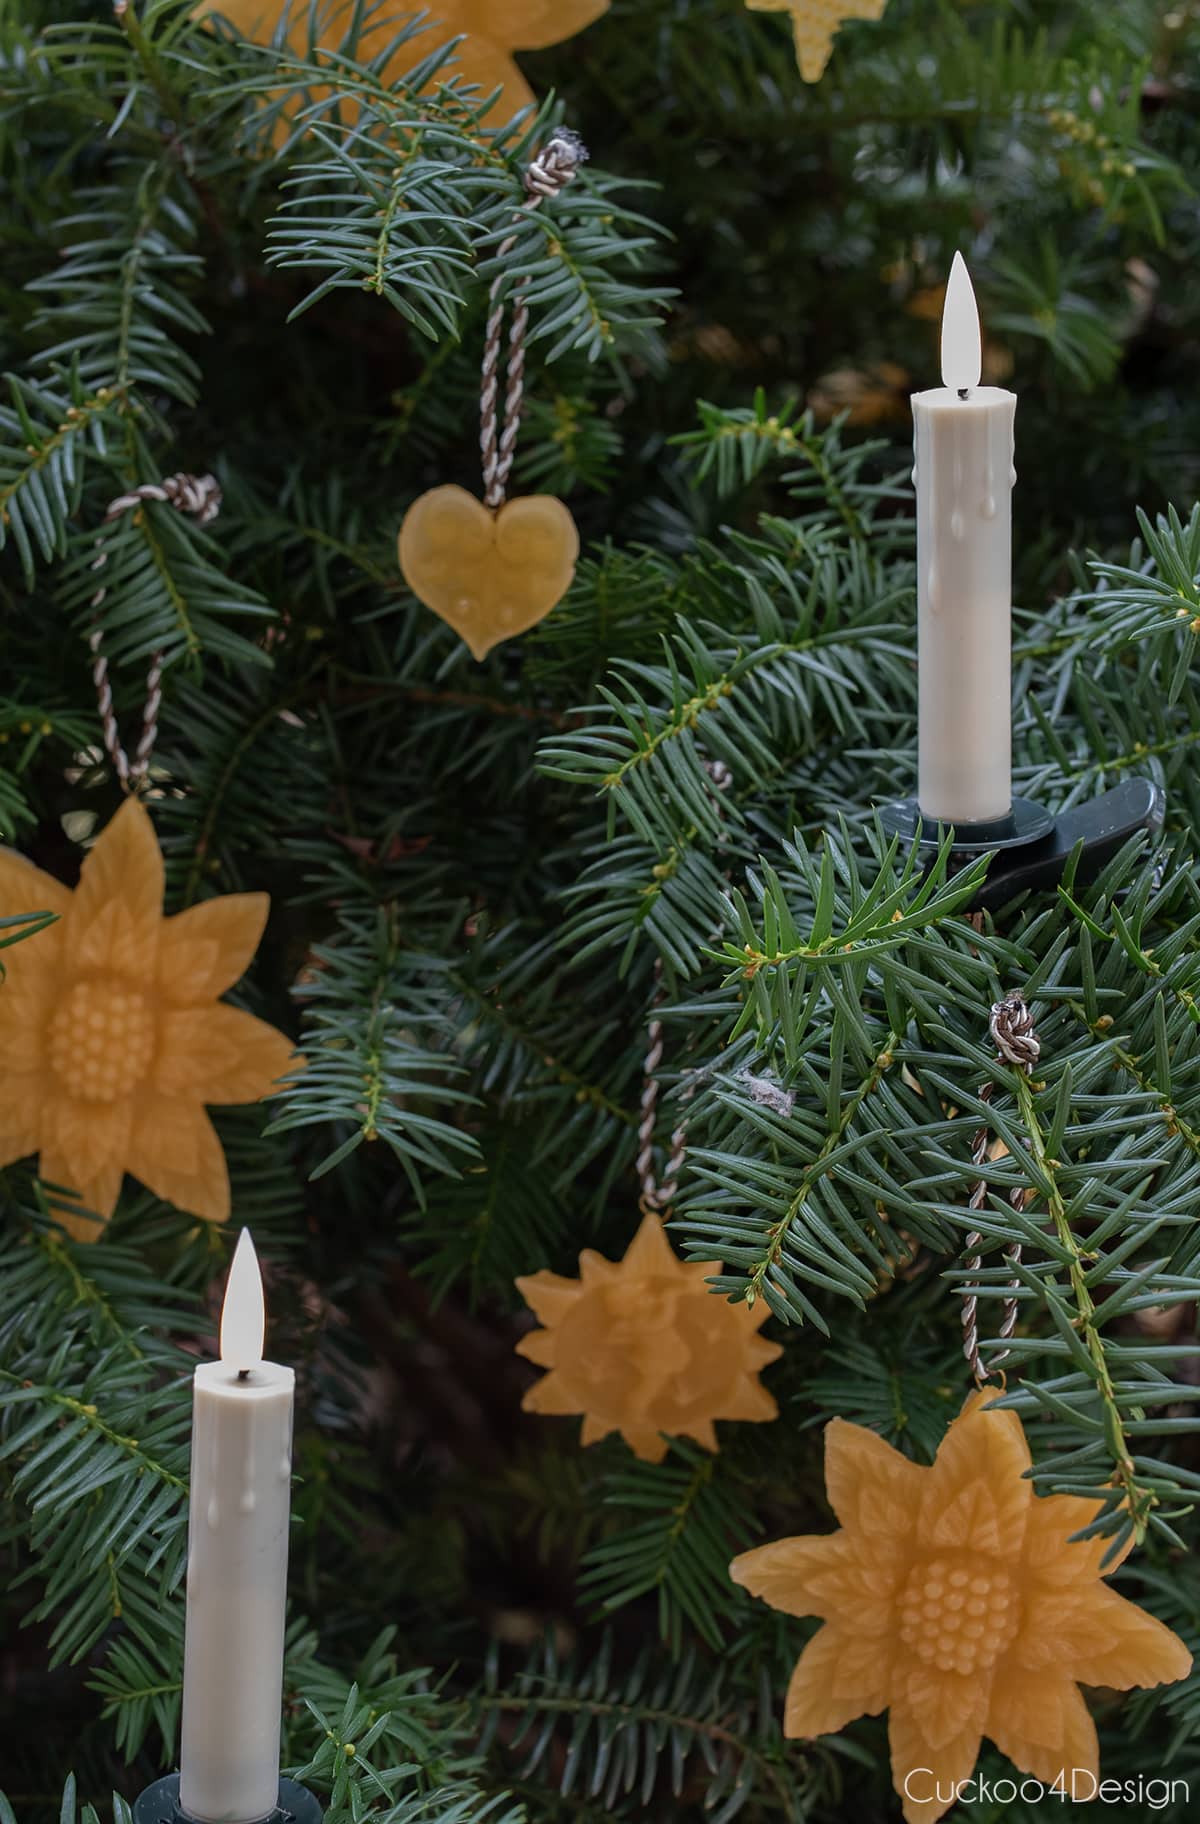 several different beeswax ornaments handing on real pine tree with a clip-on wax candle